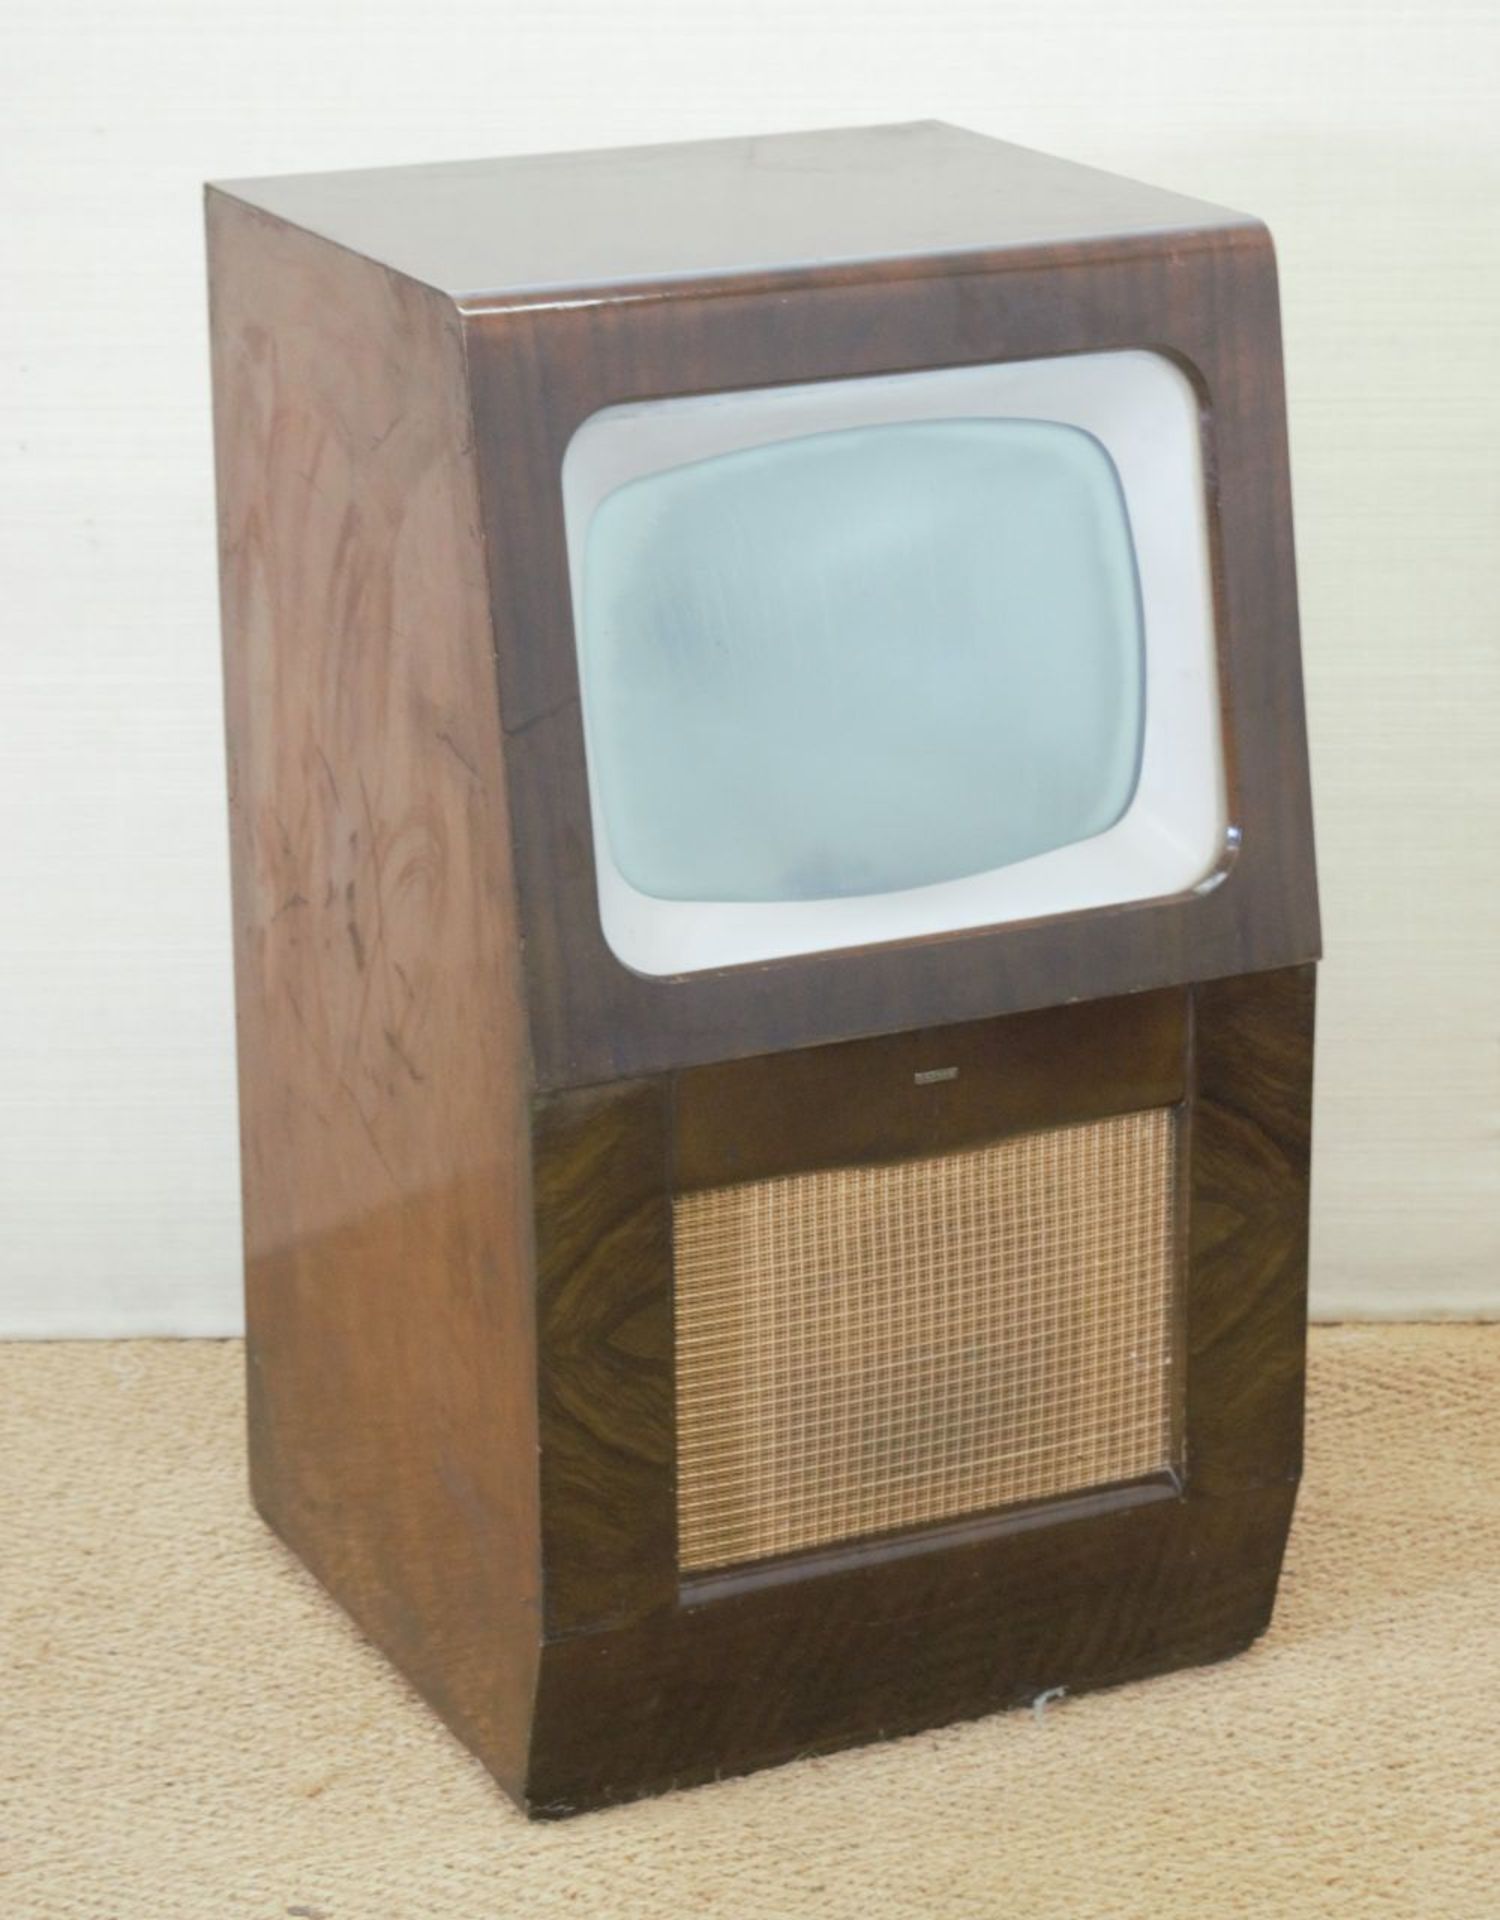 VINTAGE COSSOR TELEVISION - Image 3 of 3